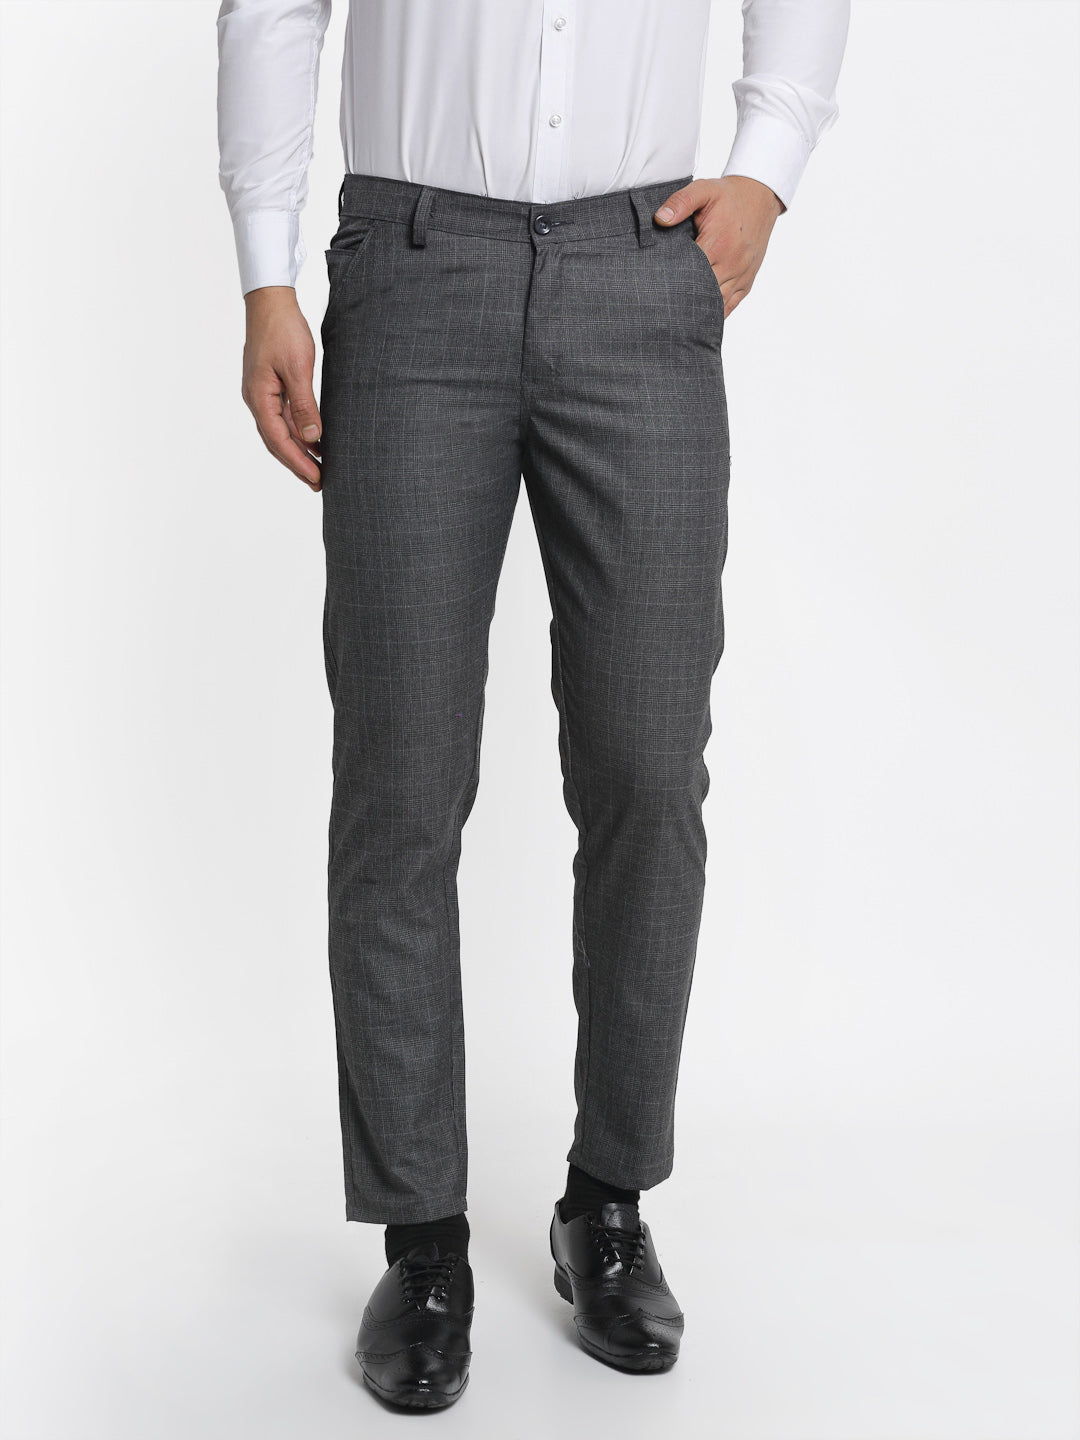 Jainish Men's Charcoal Checked Formal Trousers